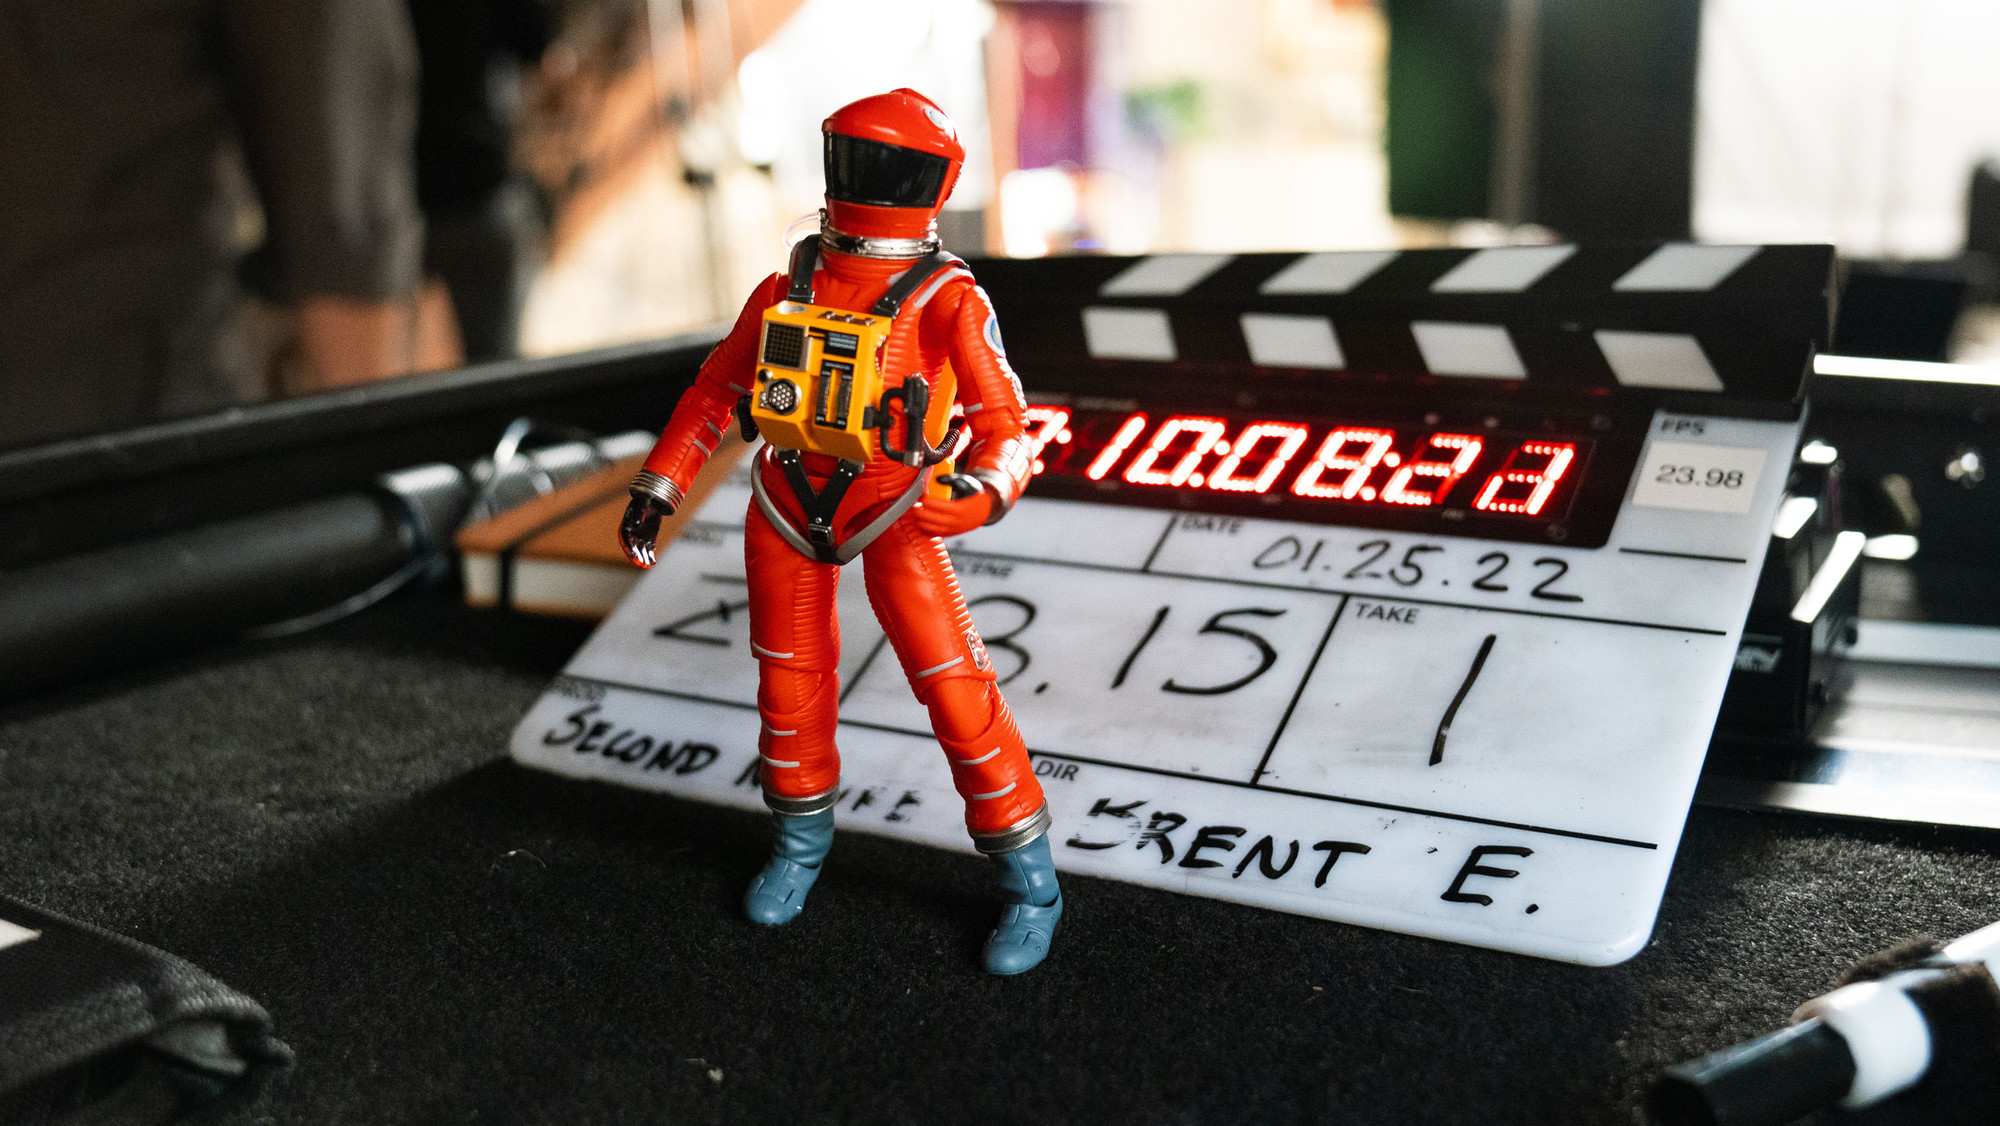 An astronaut figurine in front of a clapperboard